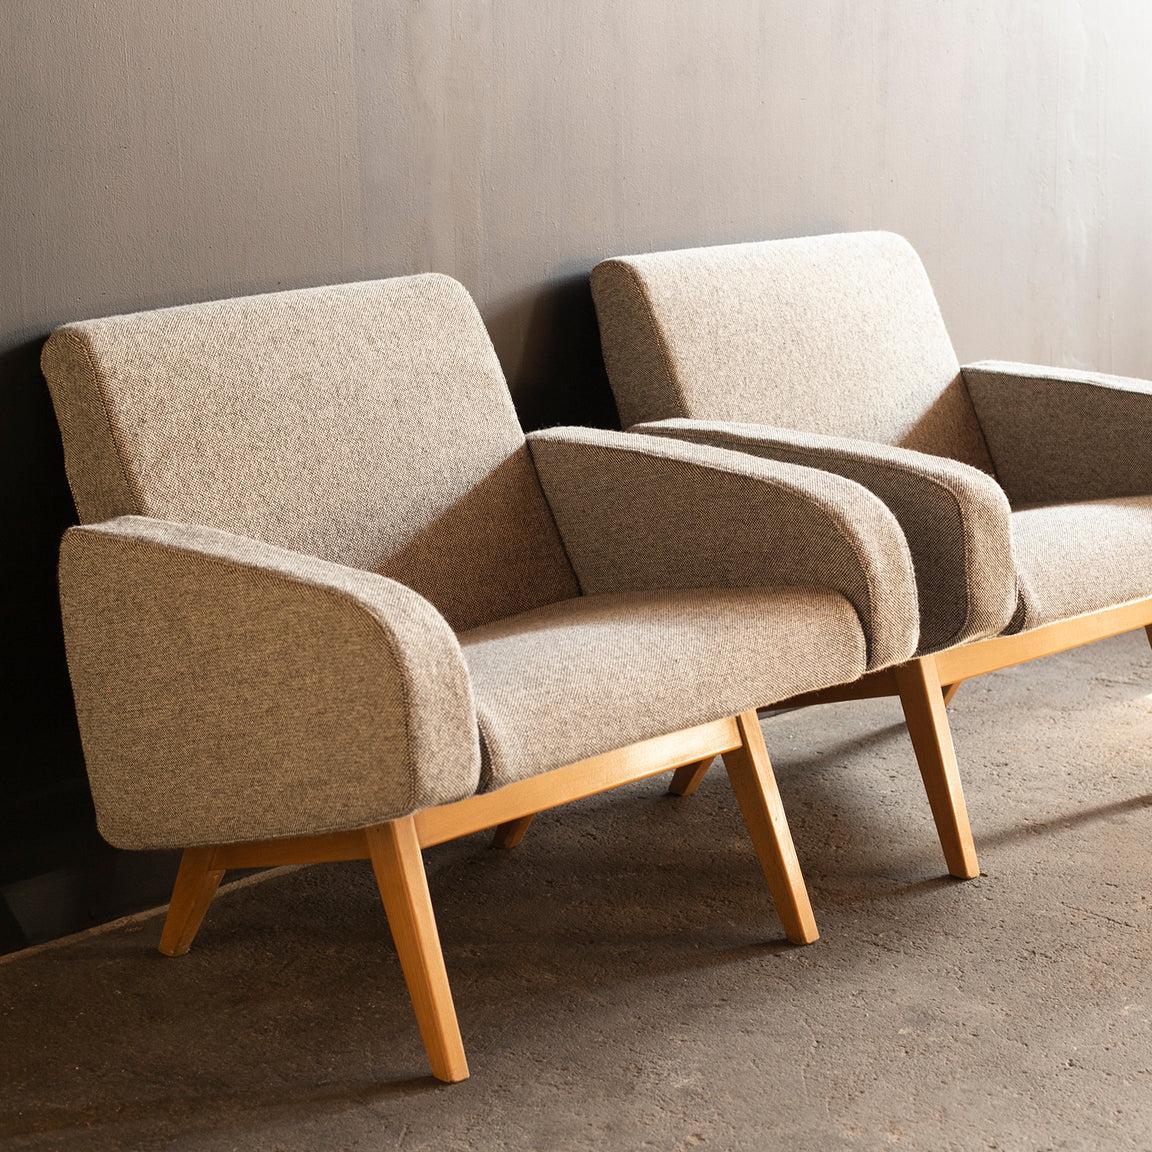 A pair of two armchairs designed by Joseph-André Motte for Steiner. Model 740.
He was awarded the René Gabriel prize at the Salon des Arts Ménagers for the Armchair 740 in 1957.
The pair is very rare model that the beech wood is used for the